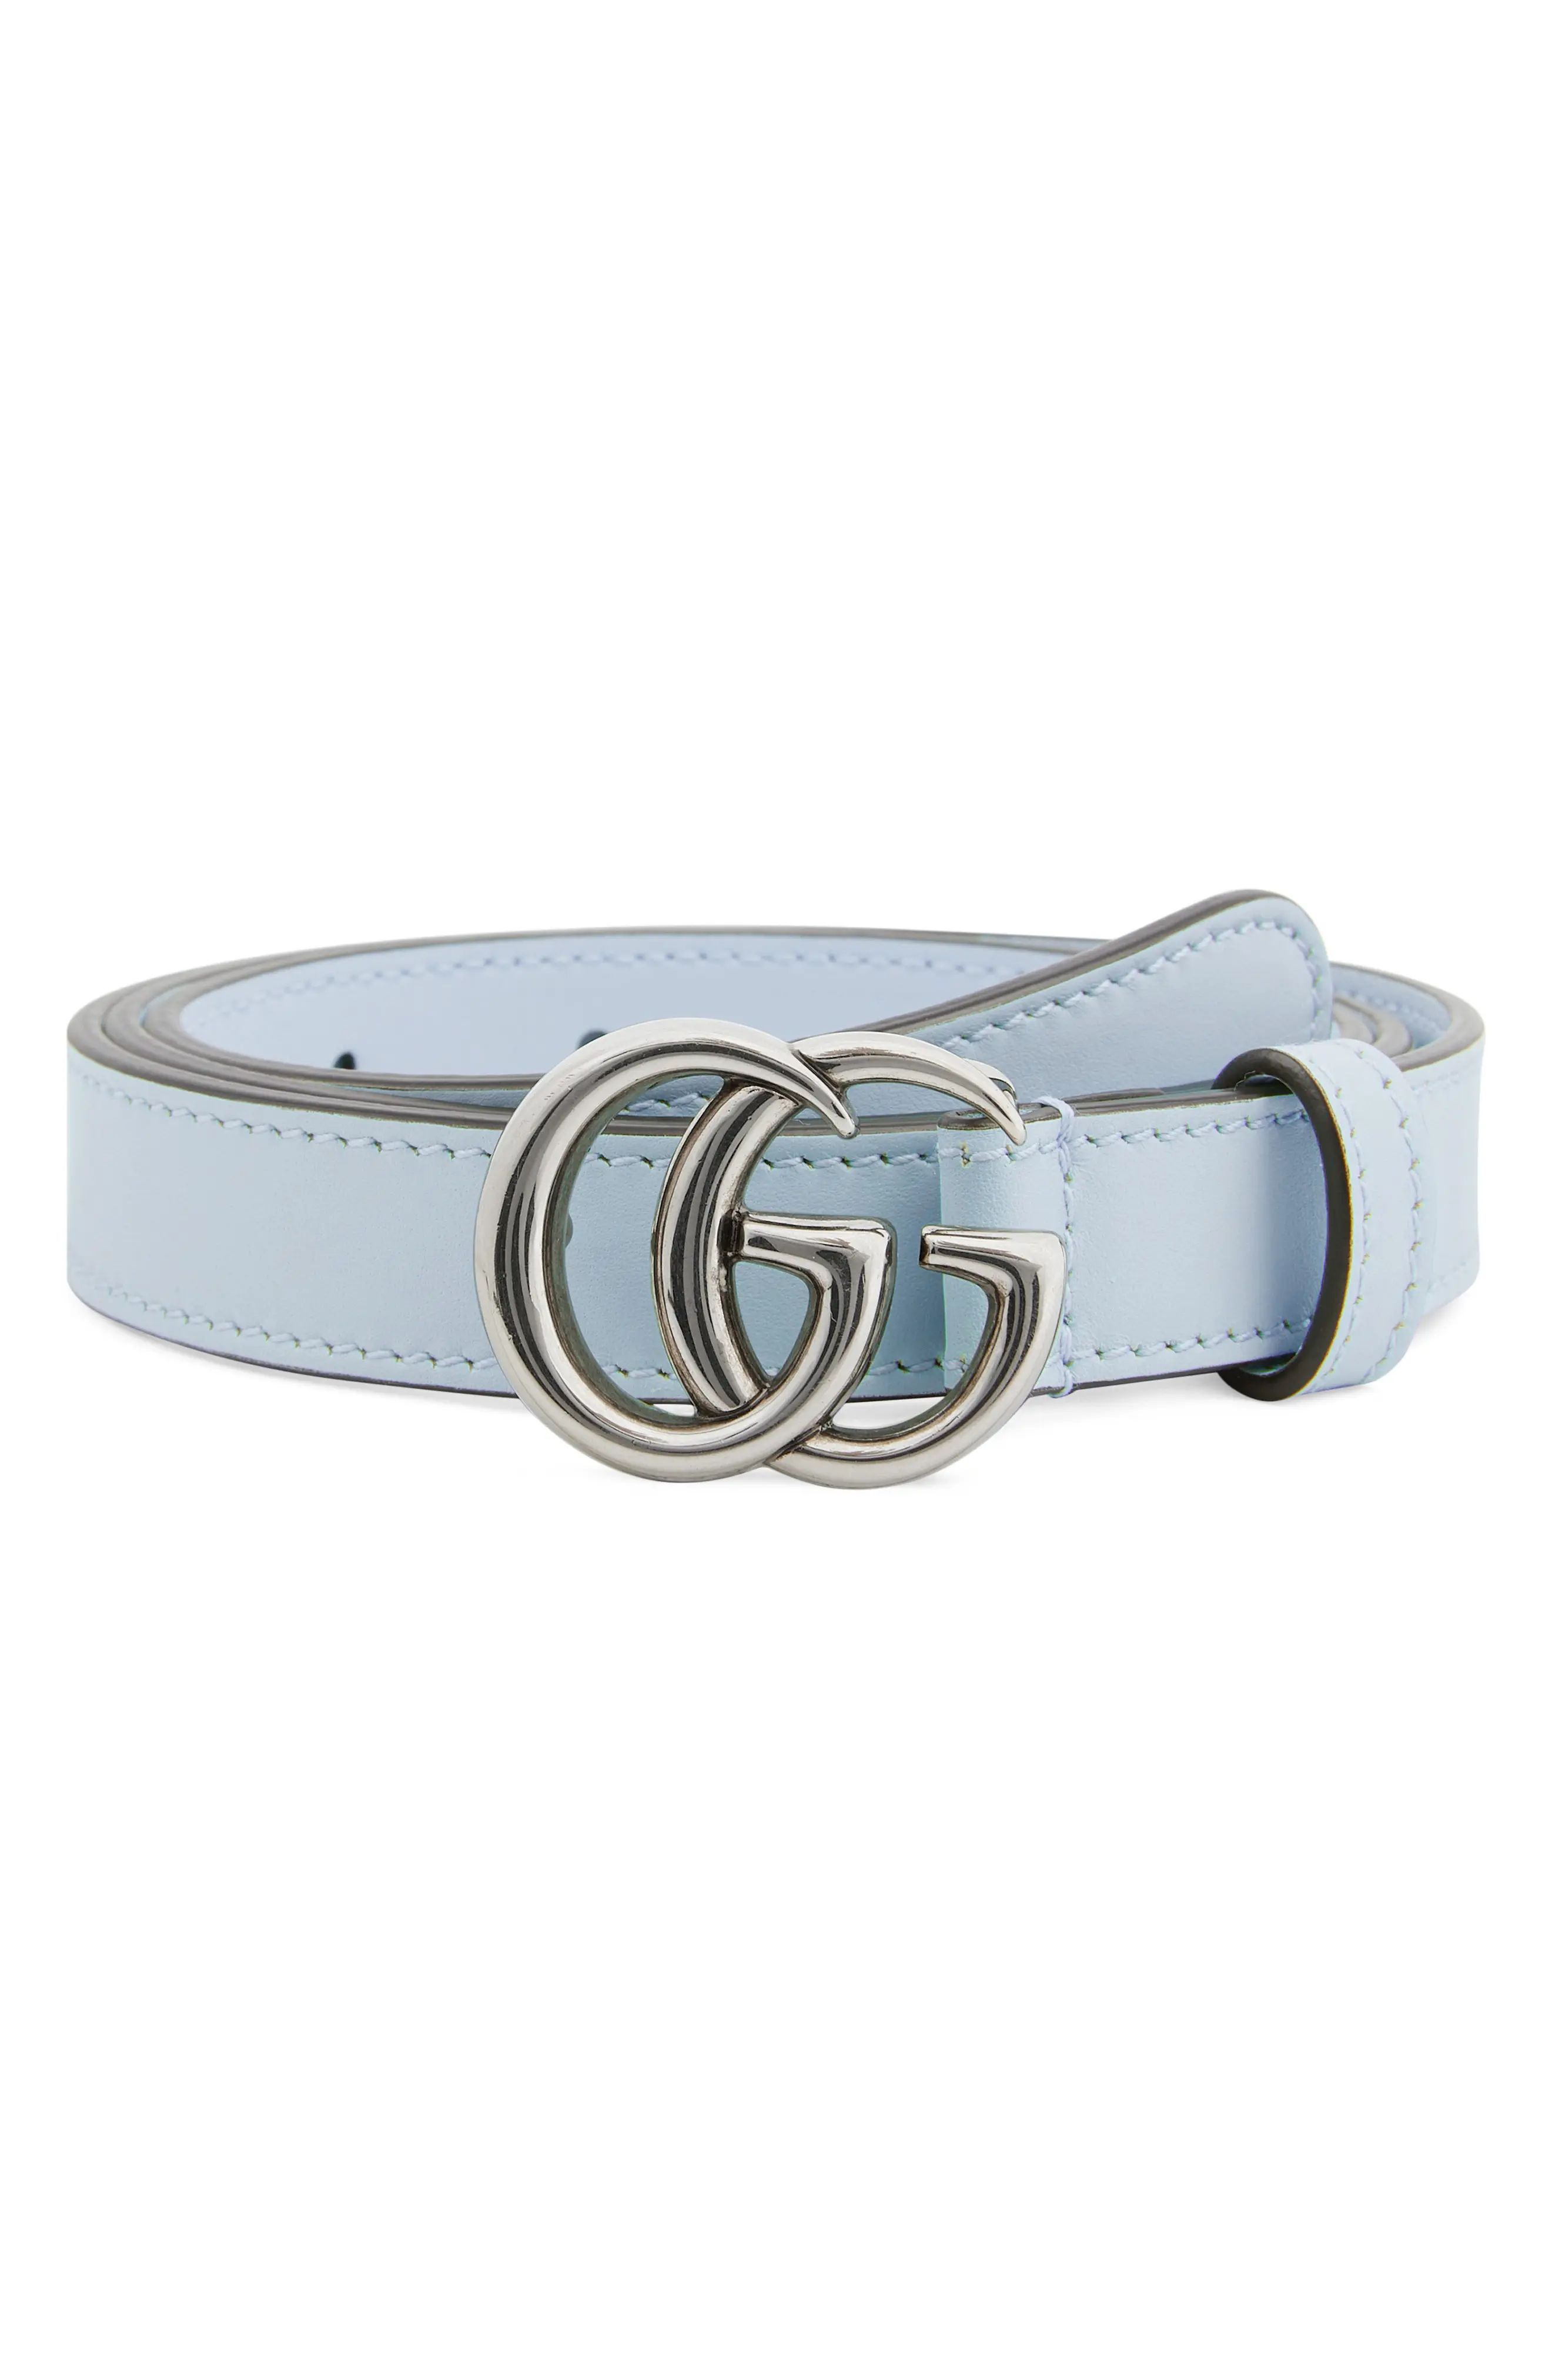 Women's Gucci Gg Buckle Skinny Leather Belt, Size 105 - Wild Rose/ Silver | Nordstrom